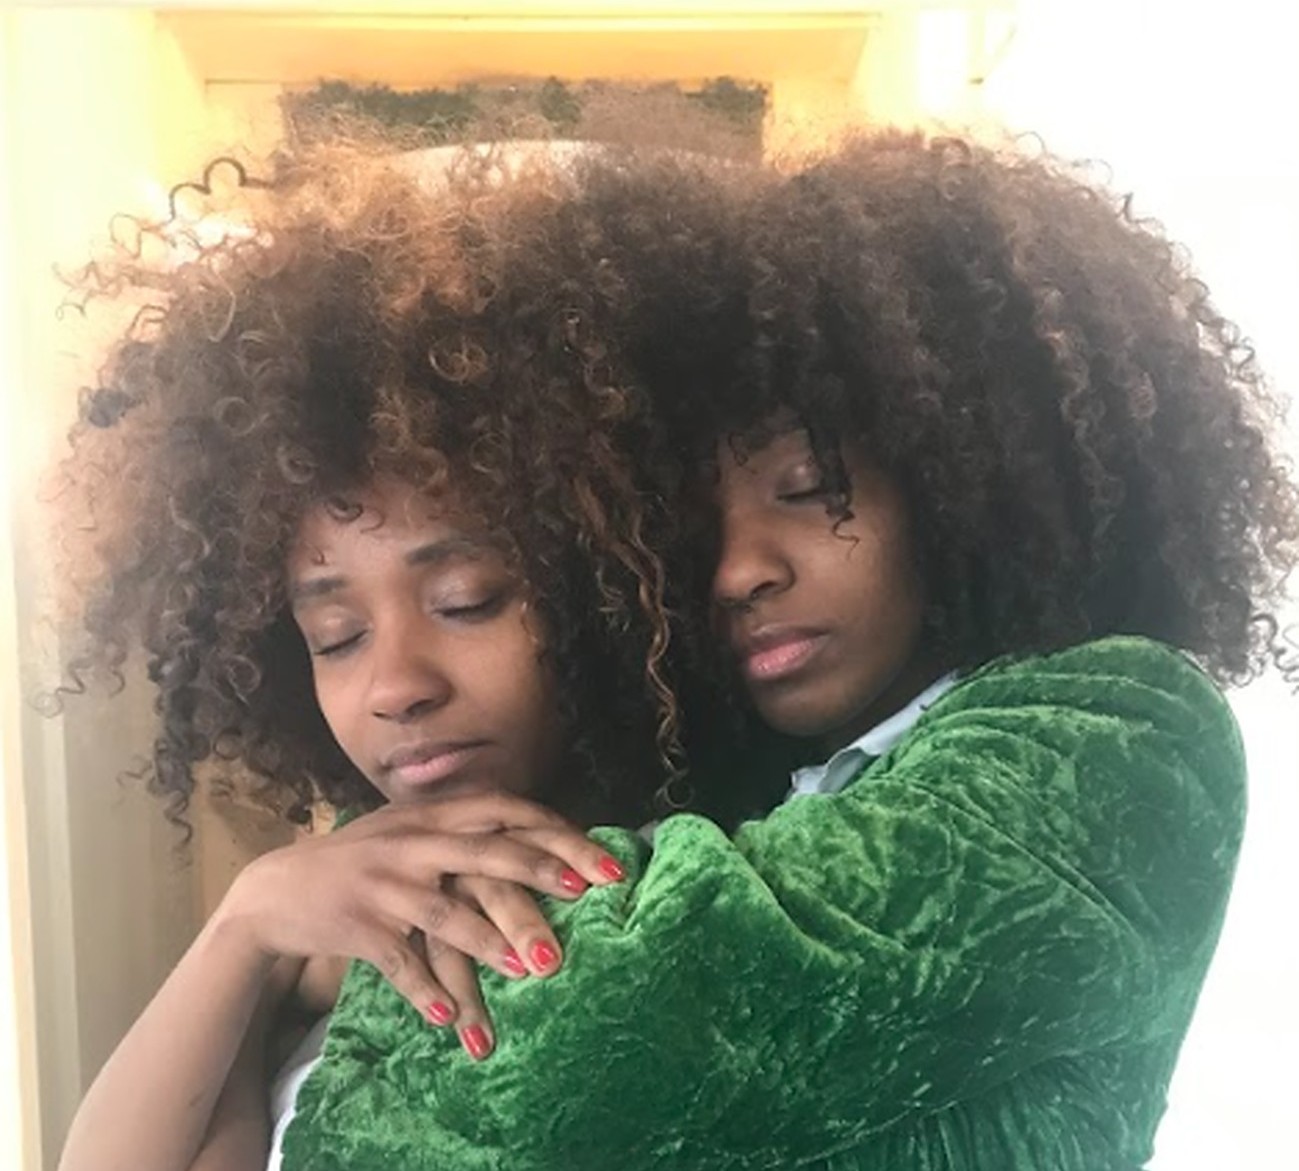 twin women with brown, curly hair embrace each other